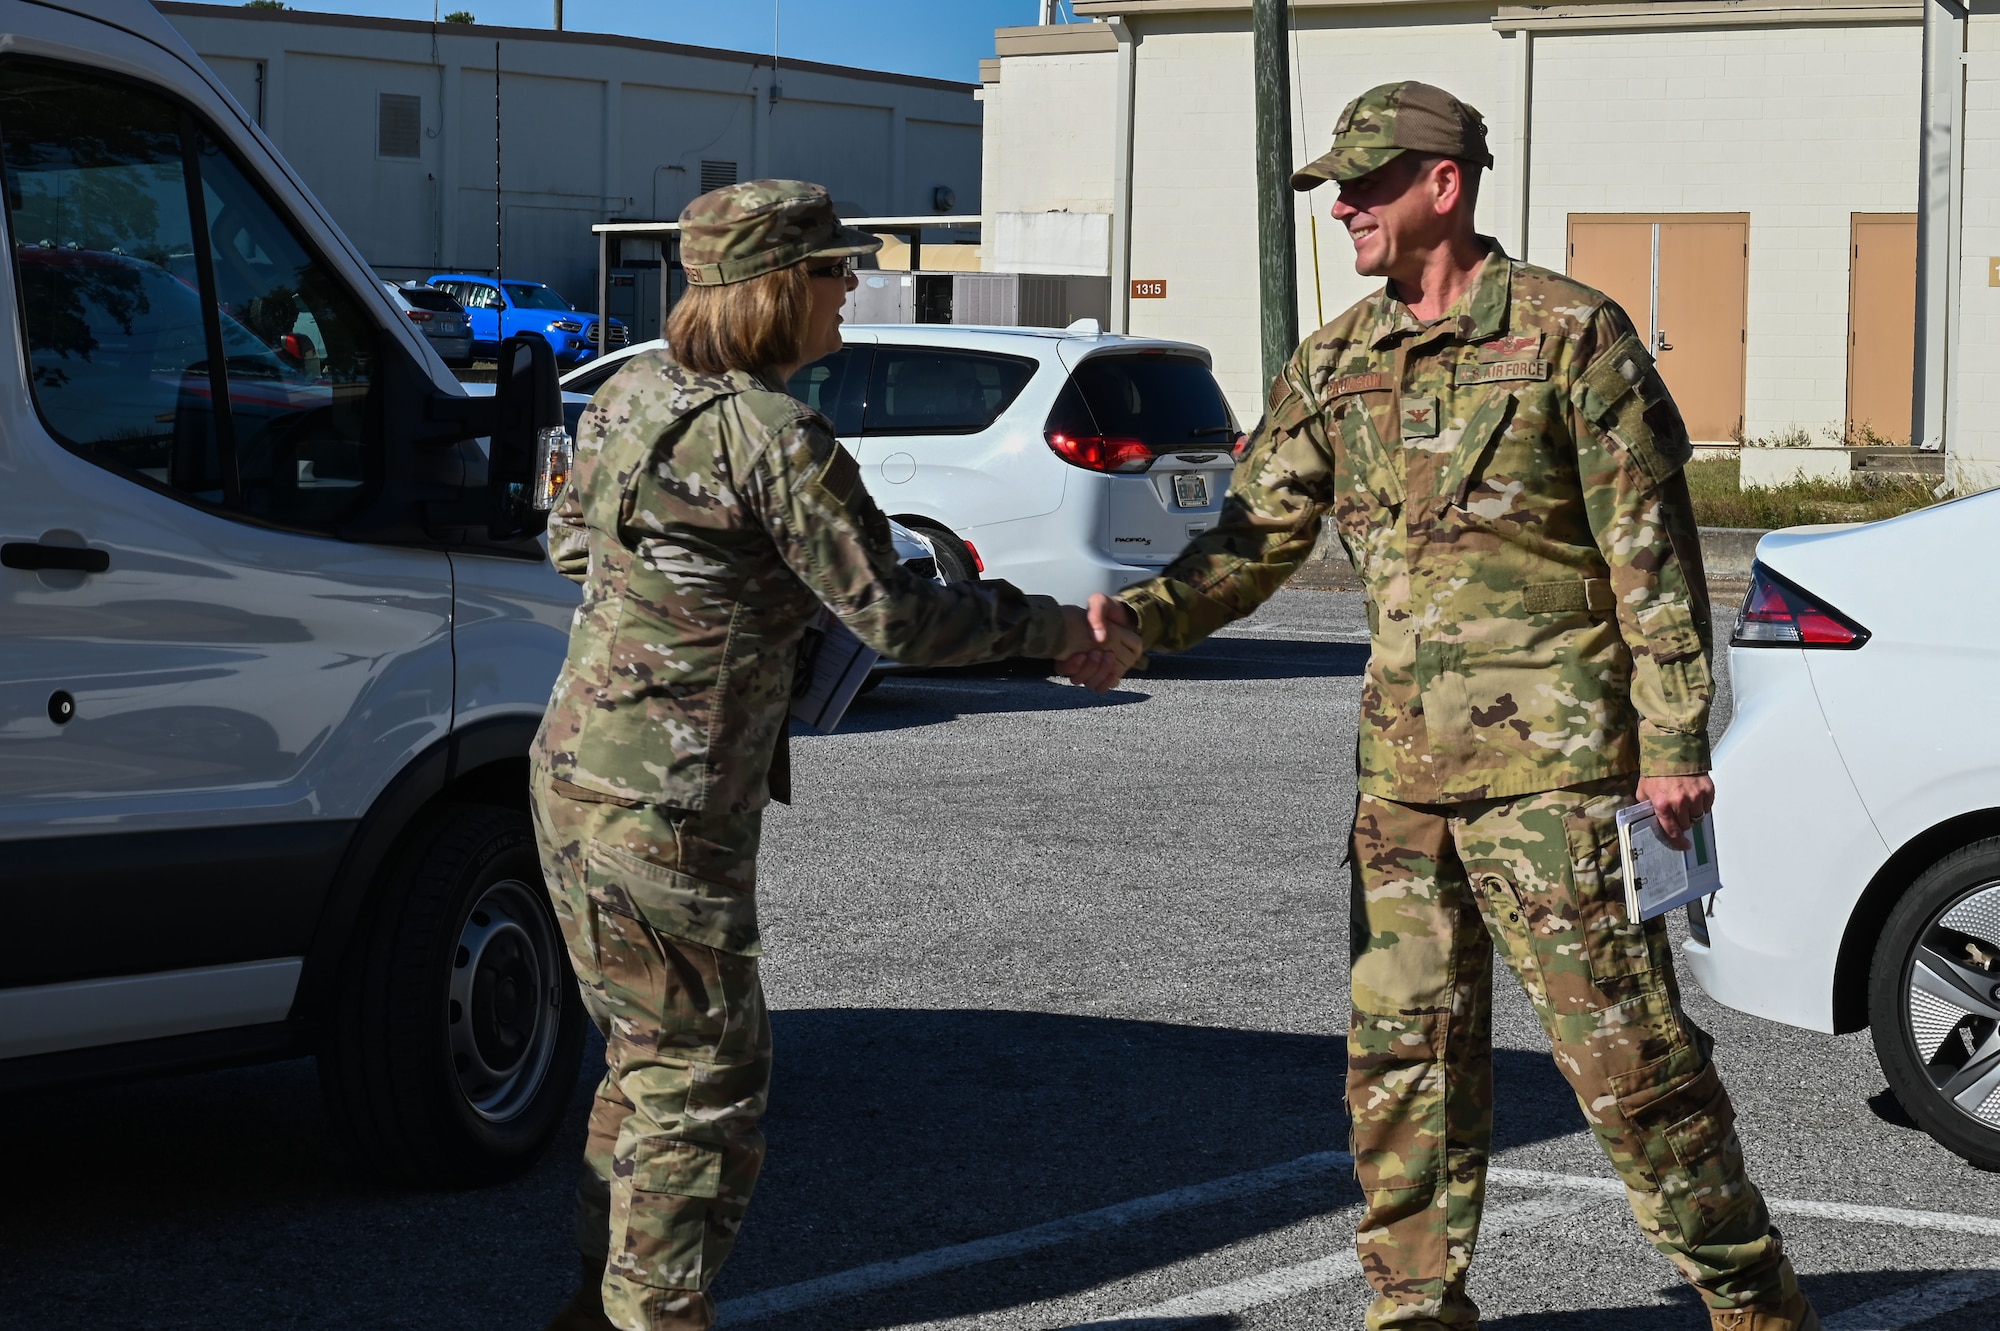 U.S. Colonel Eric Paulson, 350th Spectrum Warfare Wing (SWW) vice commander, greets U.S. Air Force Lt. Gen. Mary O’Brien, Deputy Chief of Staff for Intelligence, Surveillance, Reconnaissance and Cyber Effects Operations, during her visit at Eglin Air Force Base, Fla., Nov. 18, 2022. The 350th SWW serves as the Air Force’s first Electromagnetic Spectrum (EMS) focused wing focused on enhancing air component commanders’ ability to synchronize, integrate and execute EMS capabilities across all domains and platforms. (U.S. Air Force photo by Staff Sgt. Ericka A. Woolever)